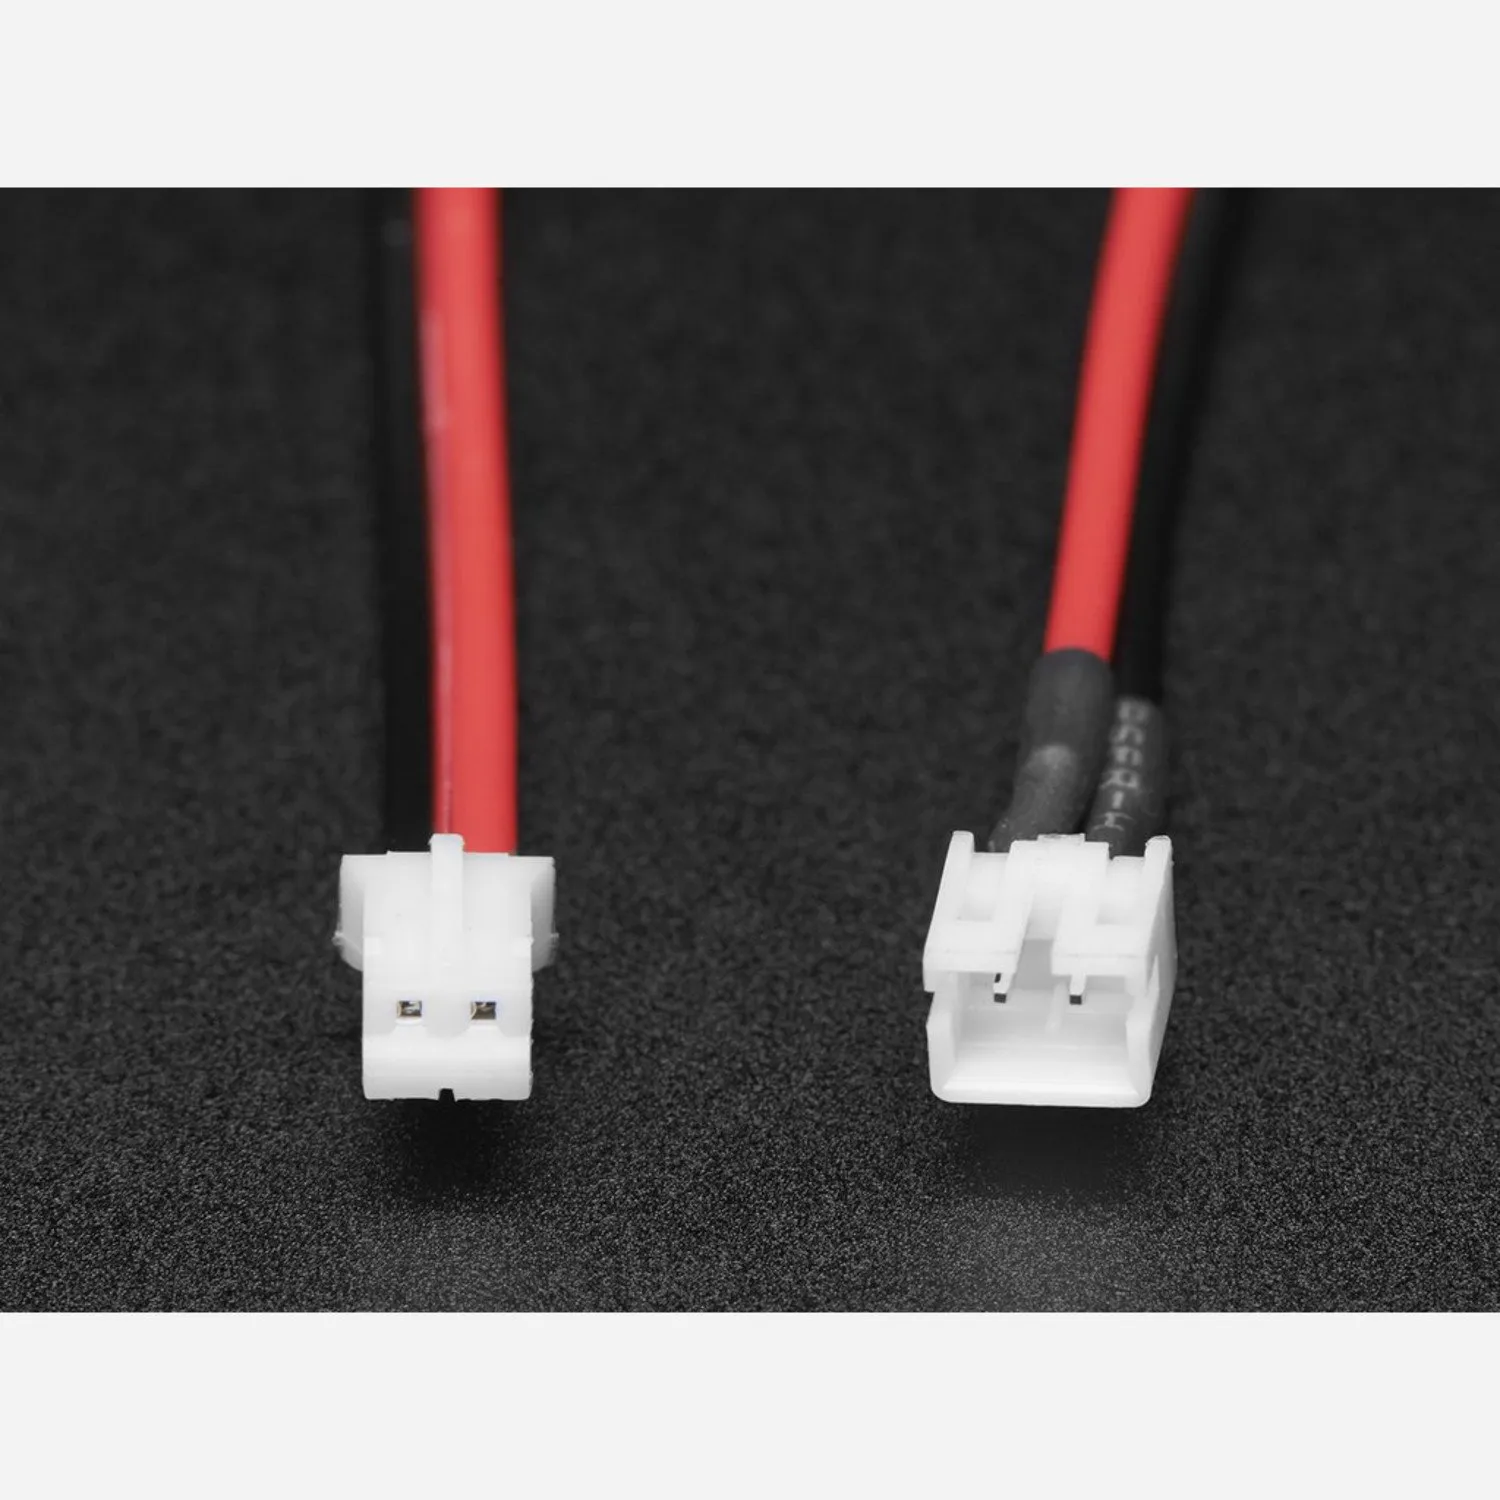 Photo of JST 2-pin Extension Cable with On/Off Switch - JST PH2